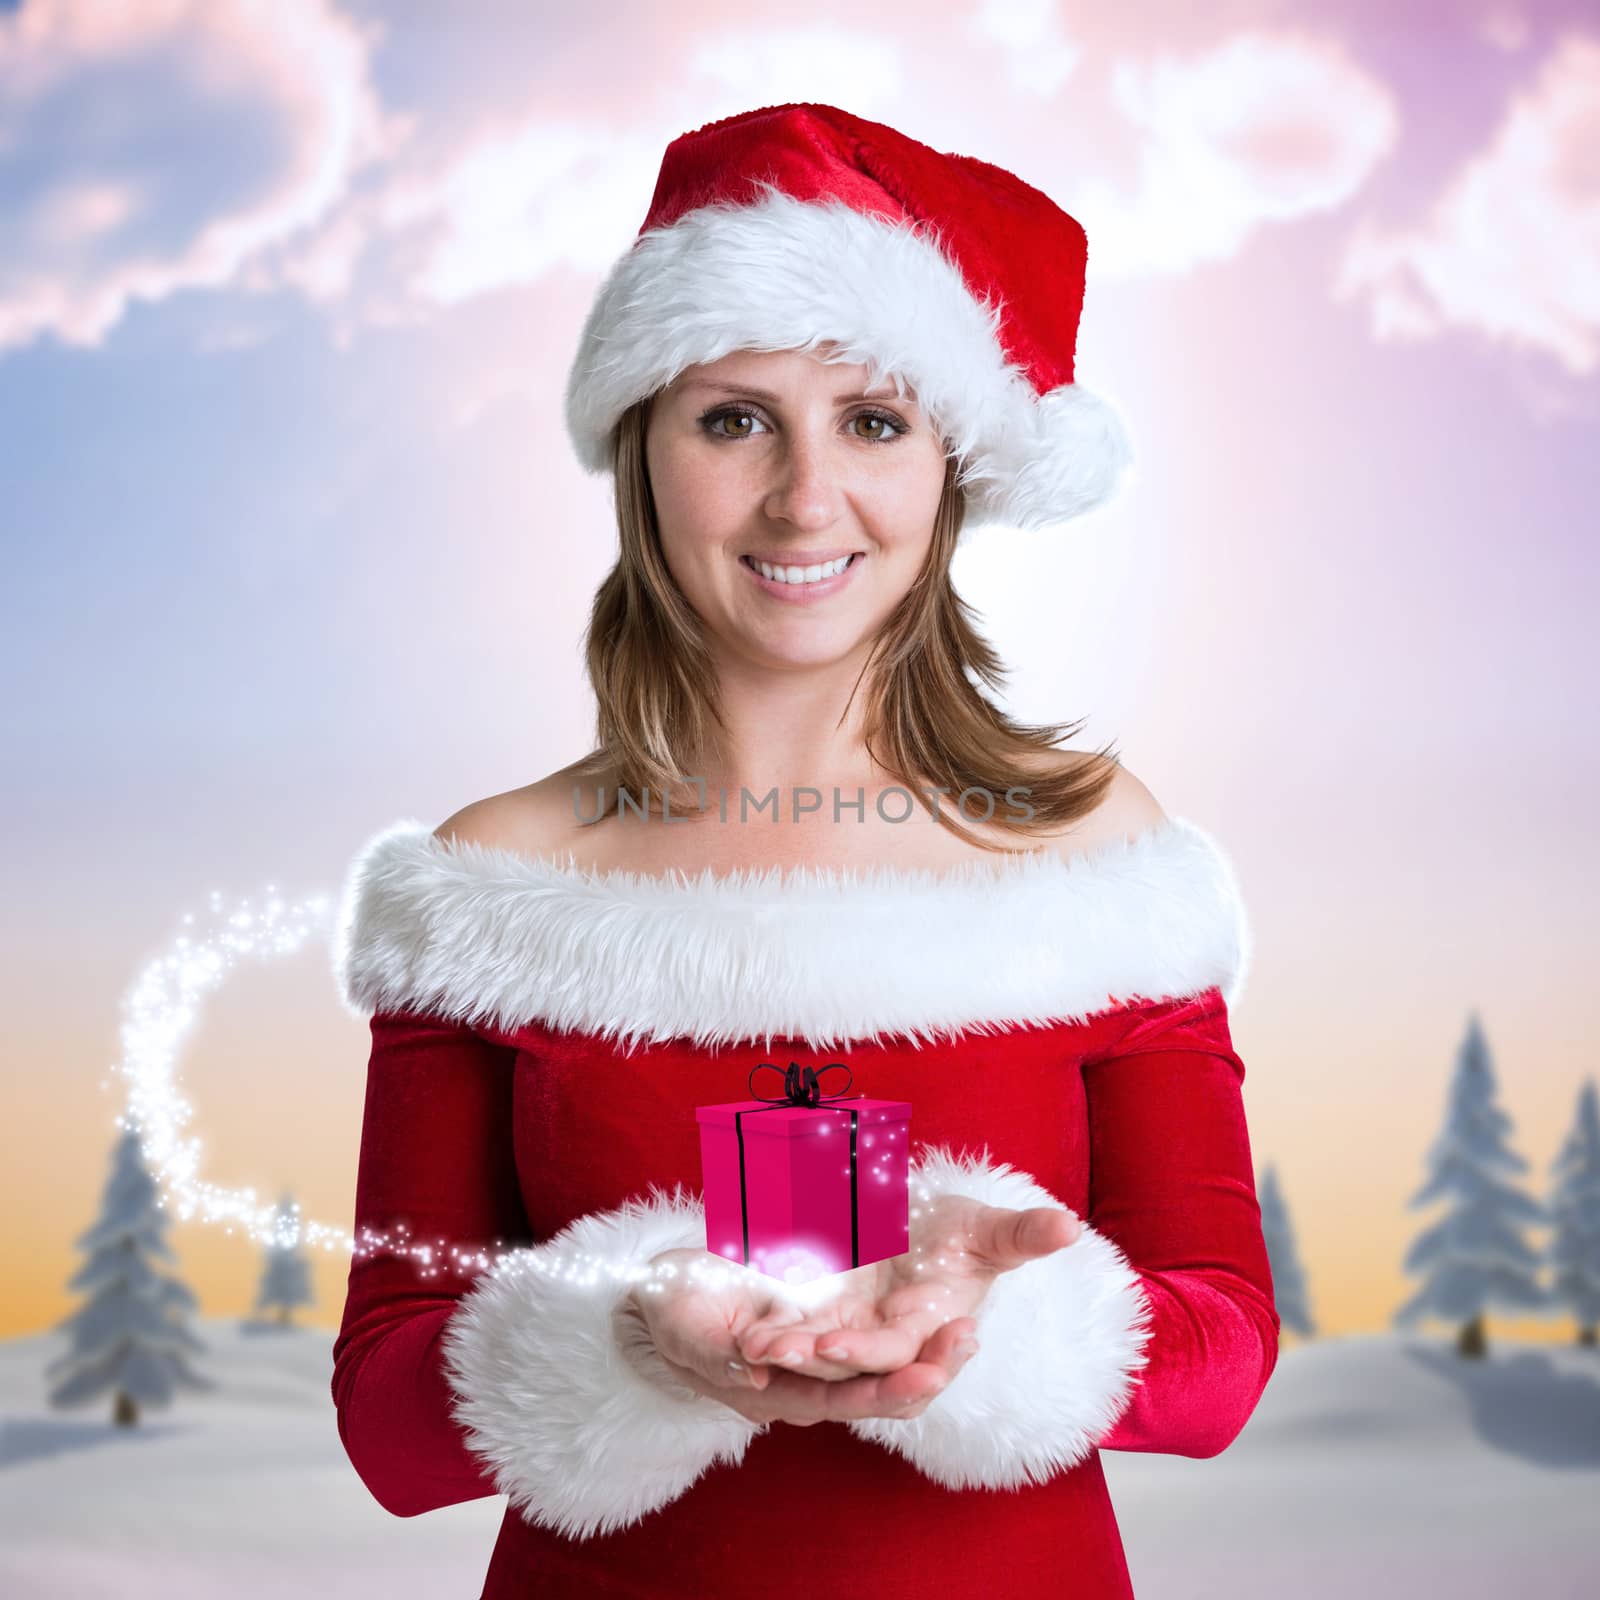 Pretty girl in santa outfit against snowy landscape with fir trees